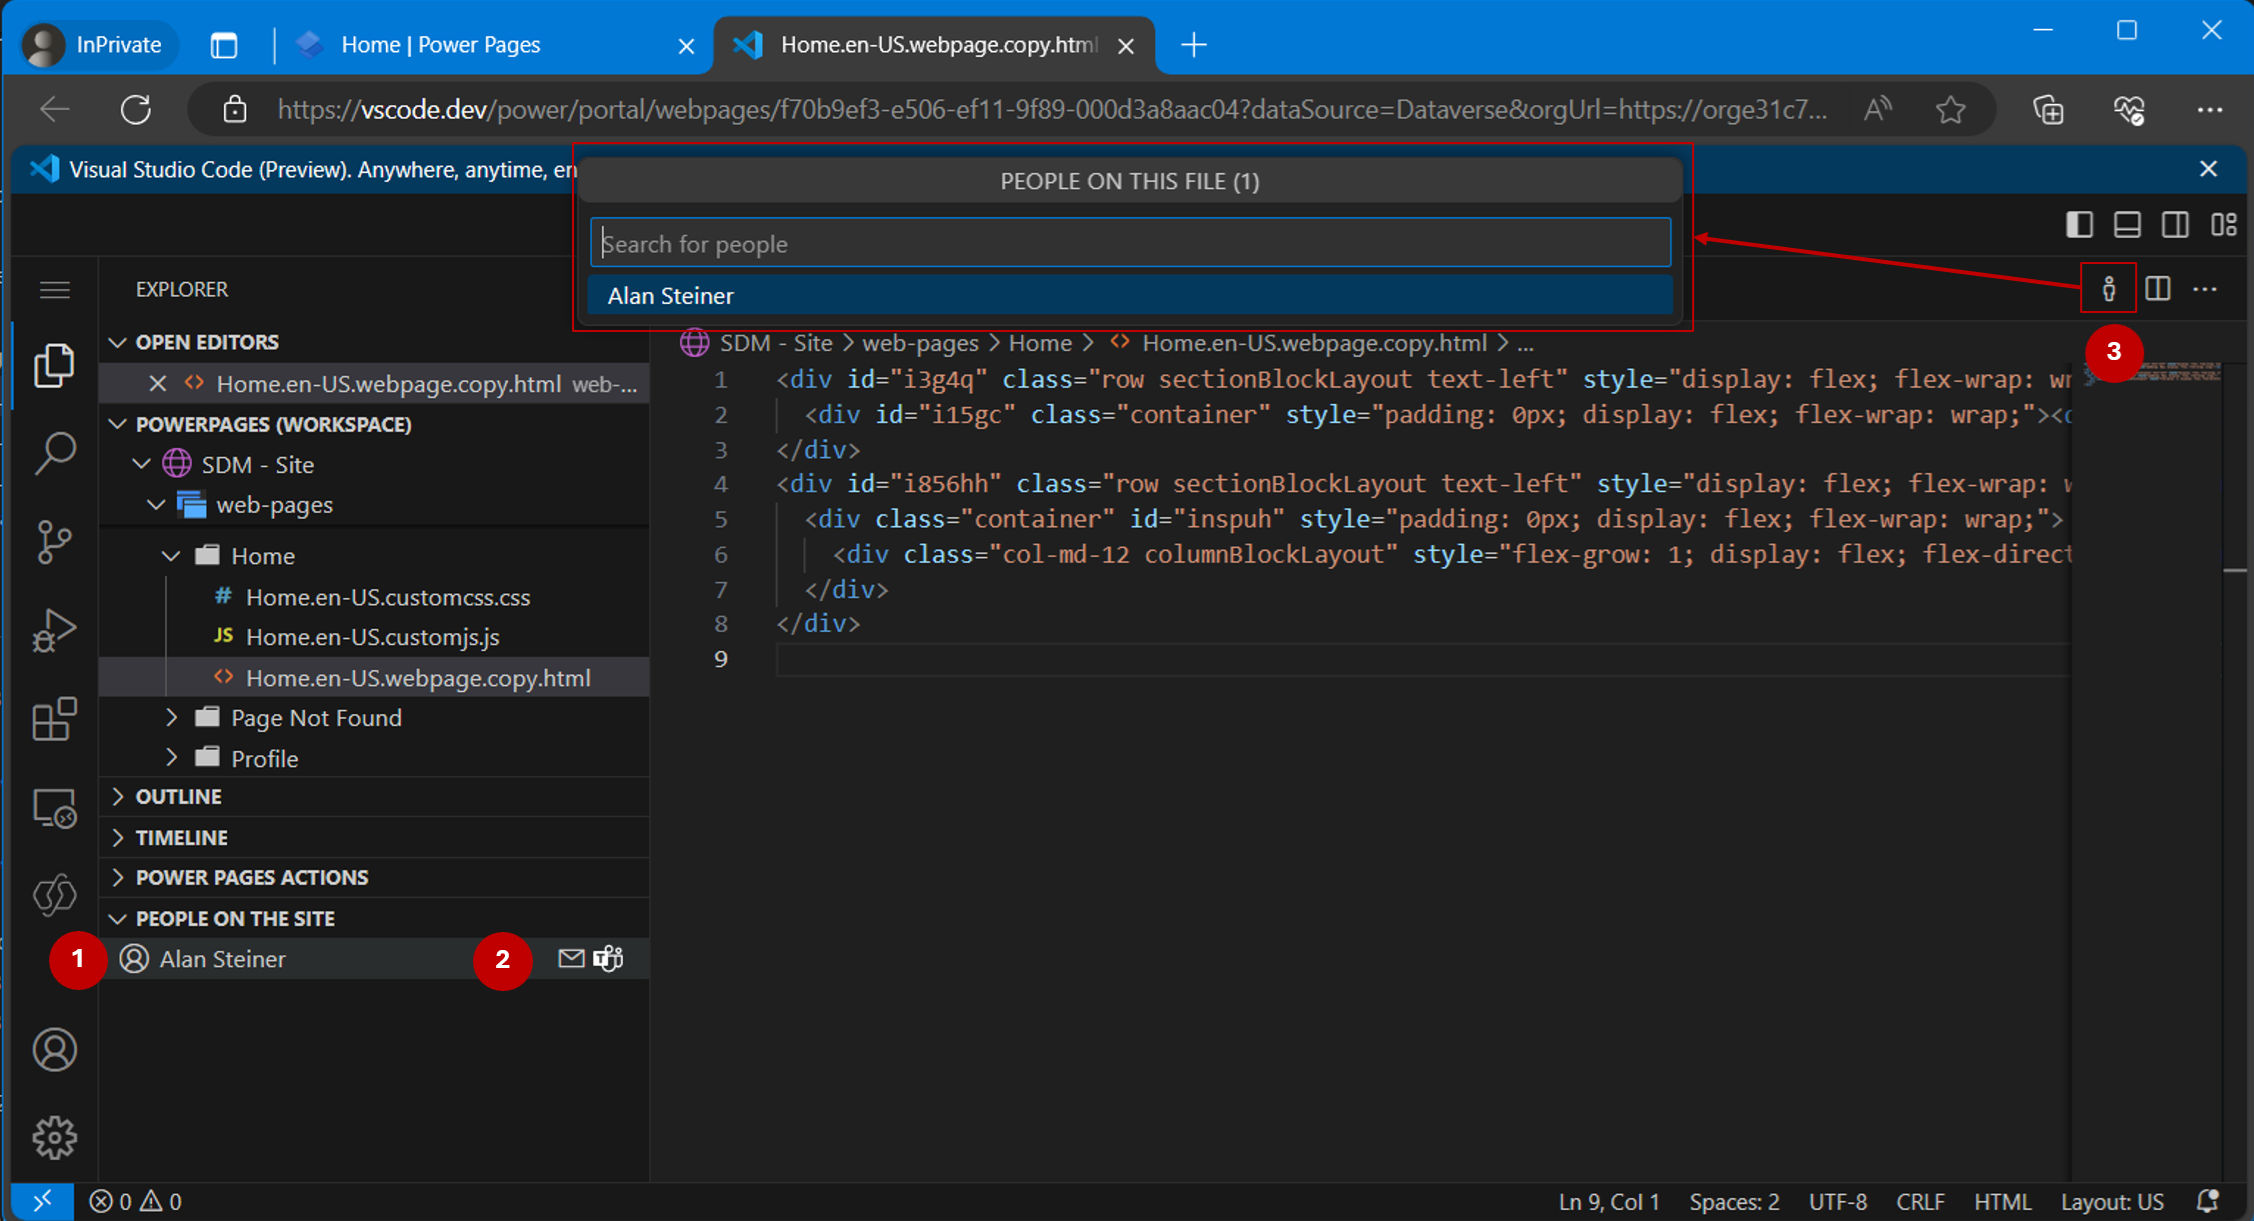 Screenshot of Visual Studio Code for the Web showing users in the Action panel with users information.